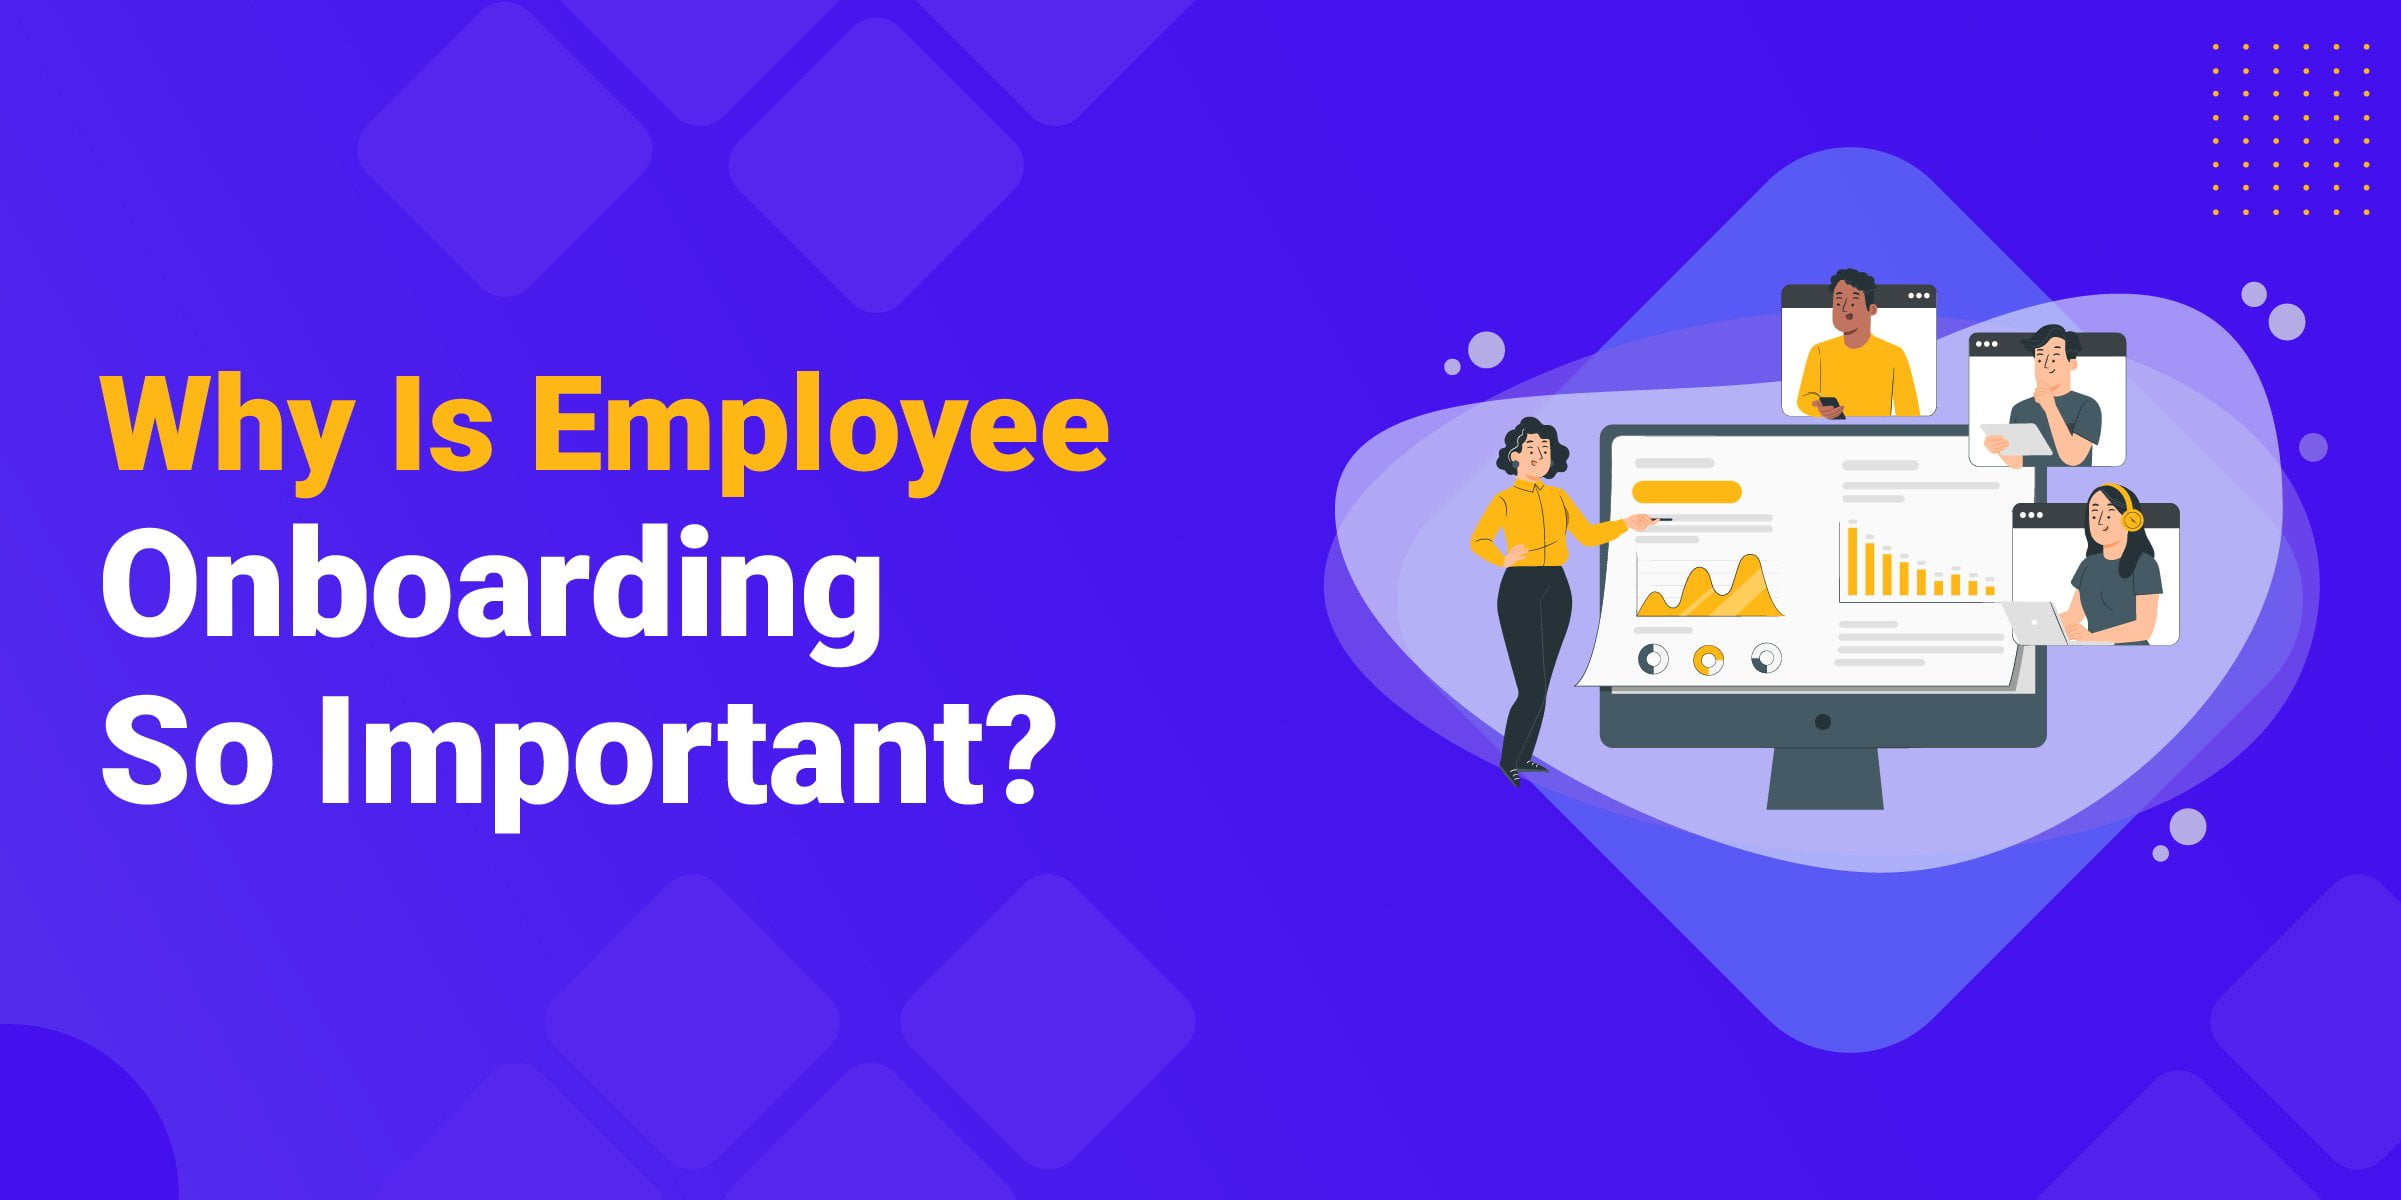 Why Is Employee Onboarding Important